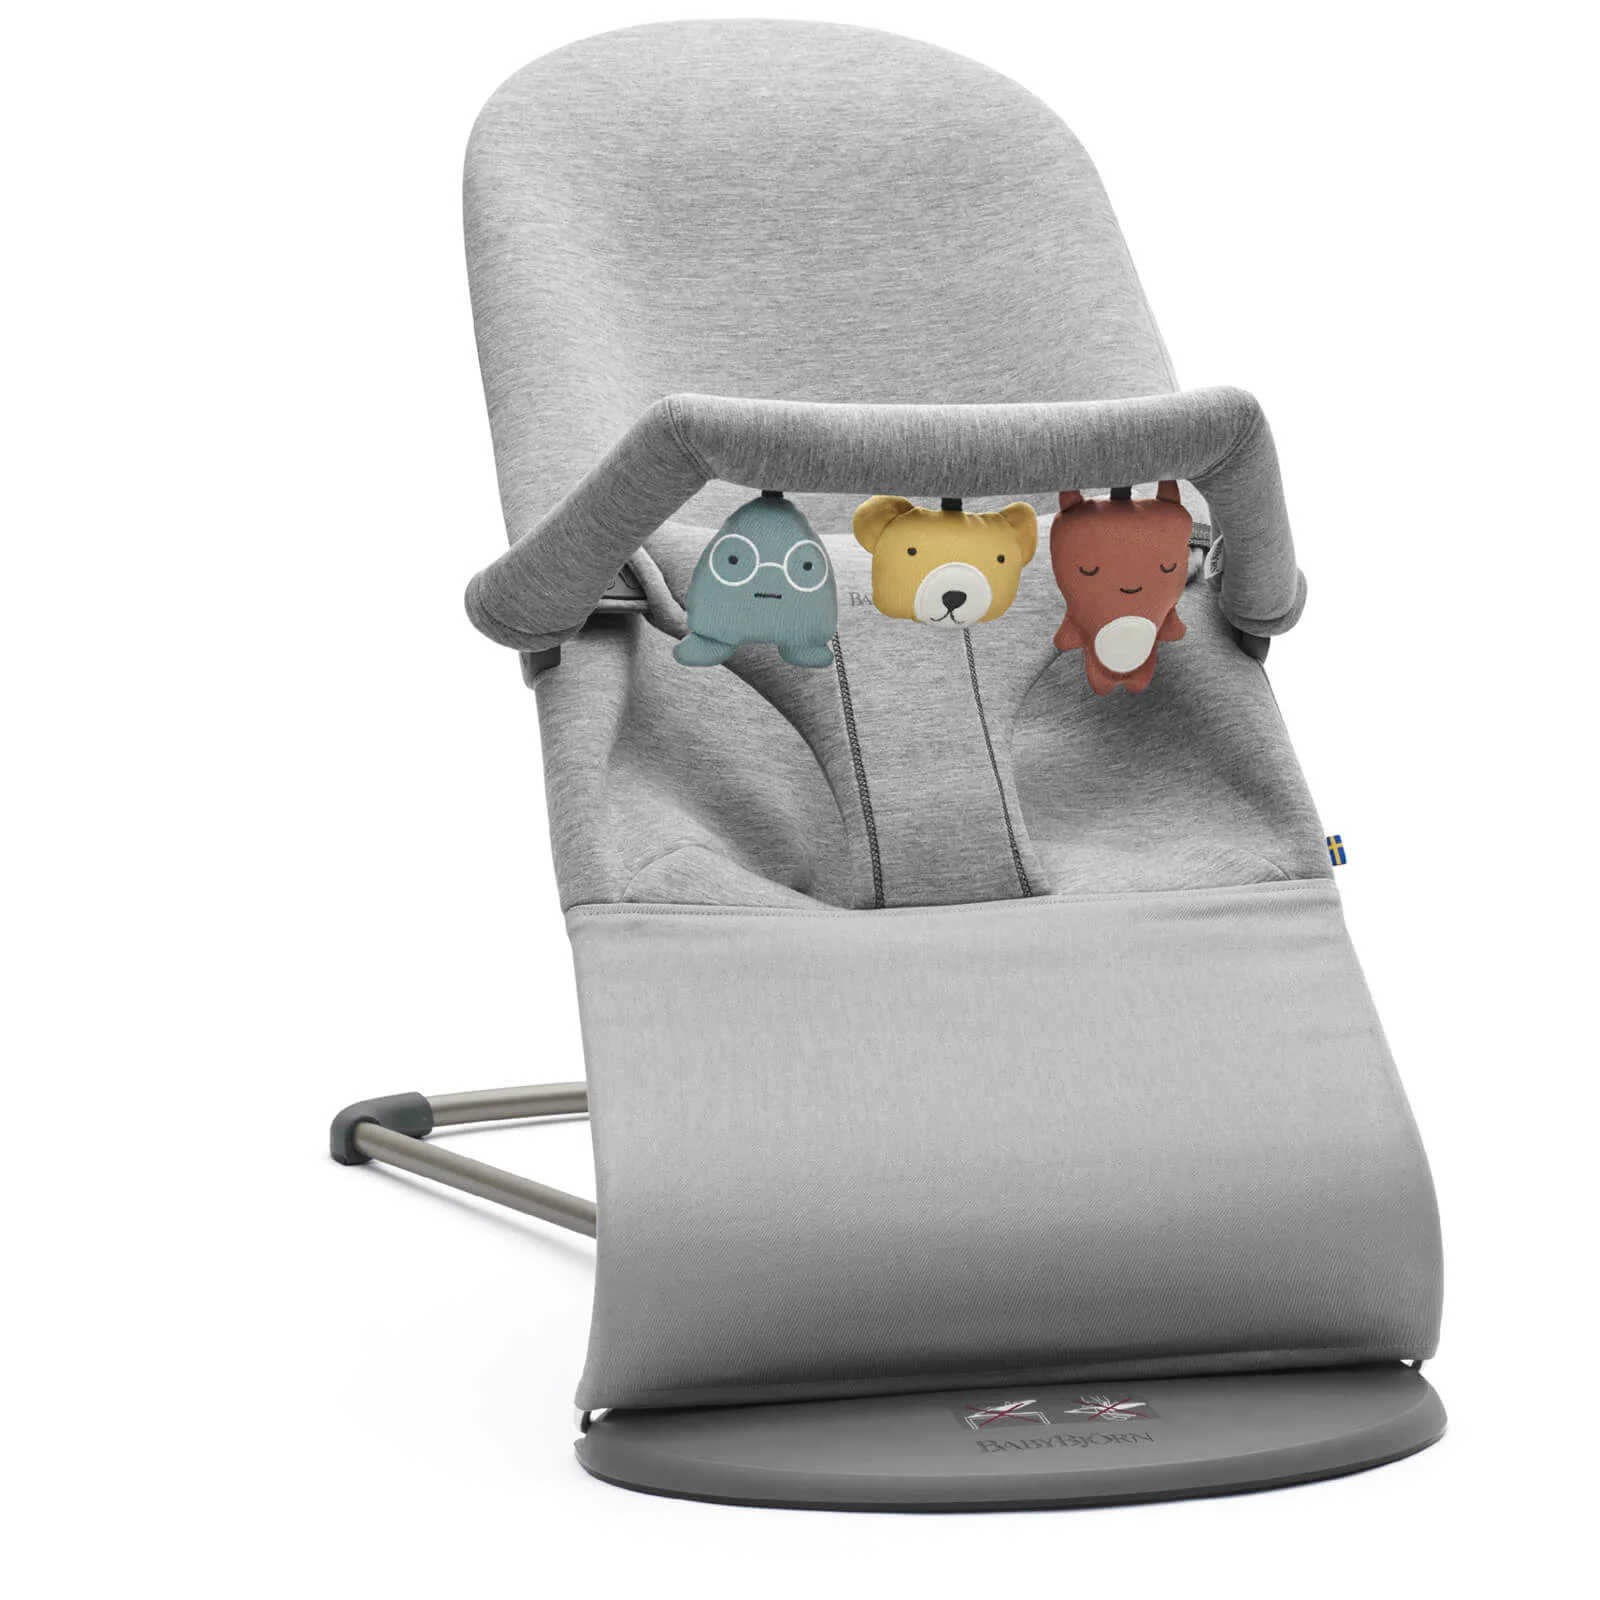 BABYBJÖRN Bouncer Bliss and Soft Friends Bouncer Toy - Light Grey Image 1